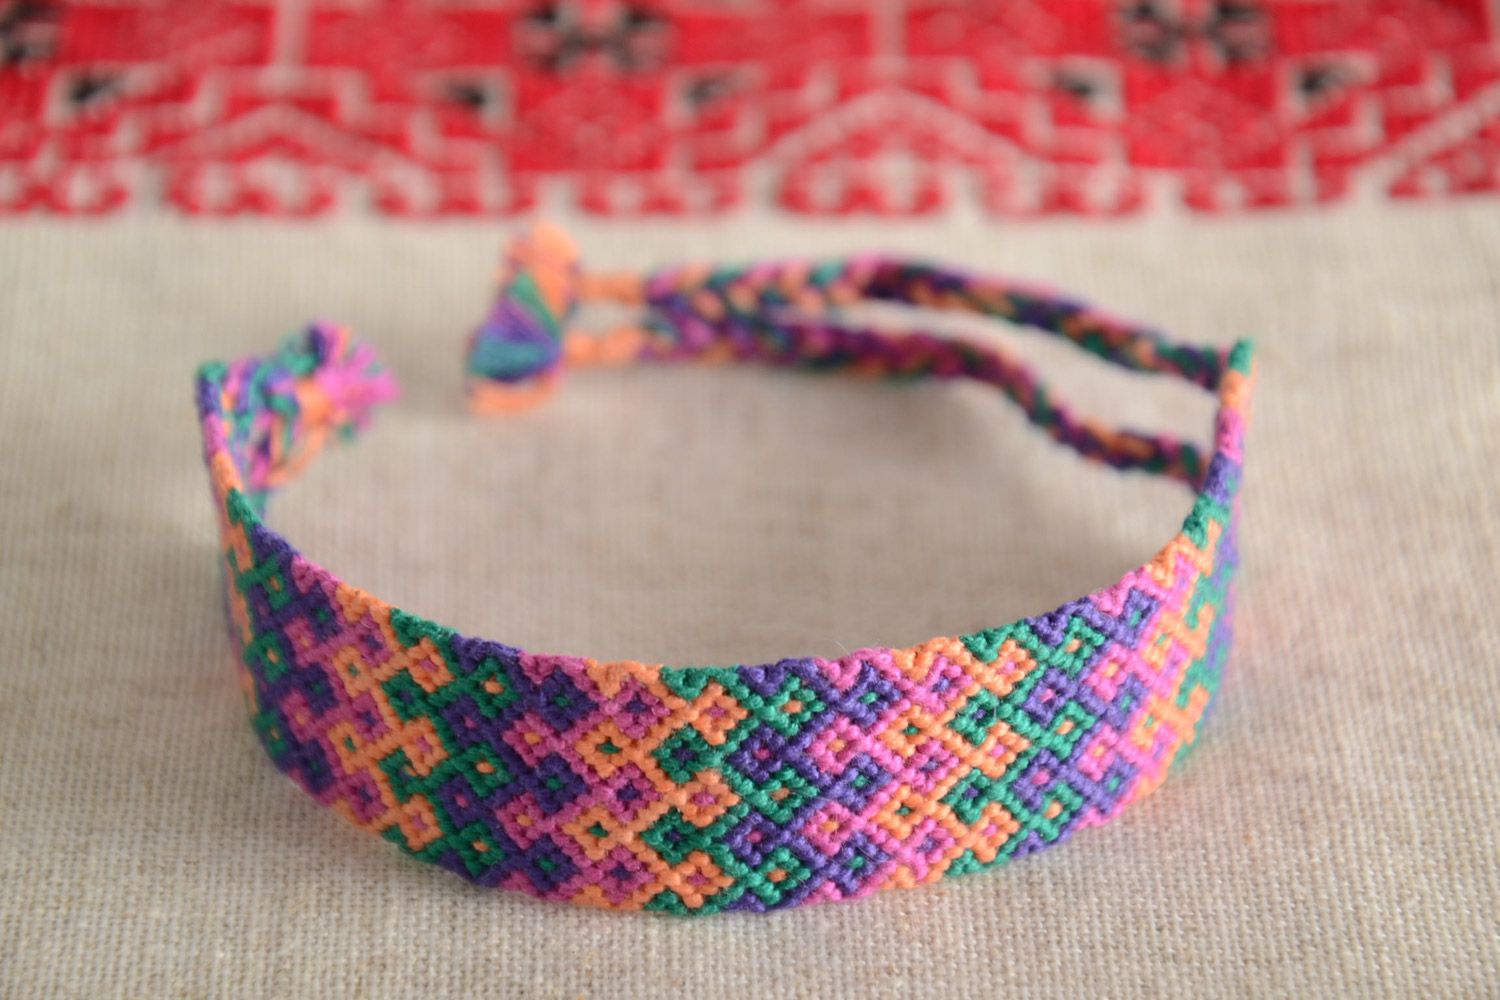 Handmade colorful friendship wrist bracelet woven of embroidery floss for women photo 1